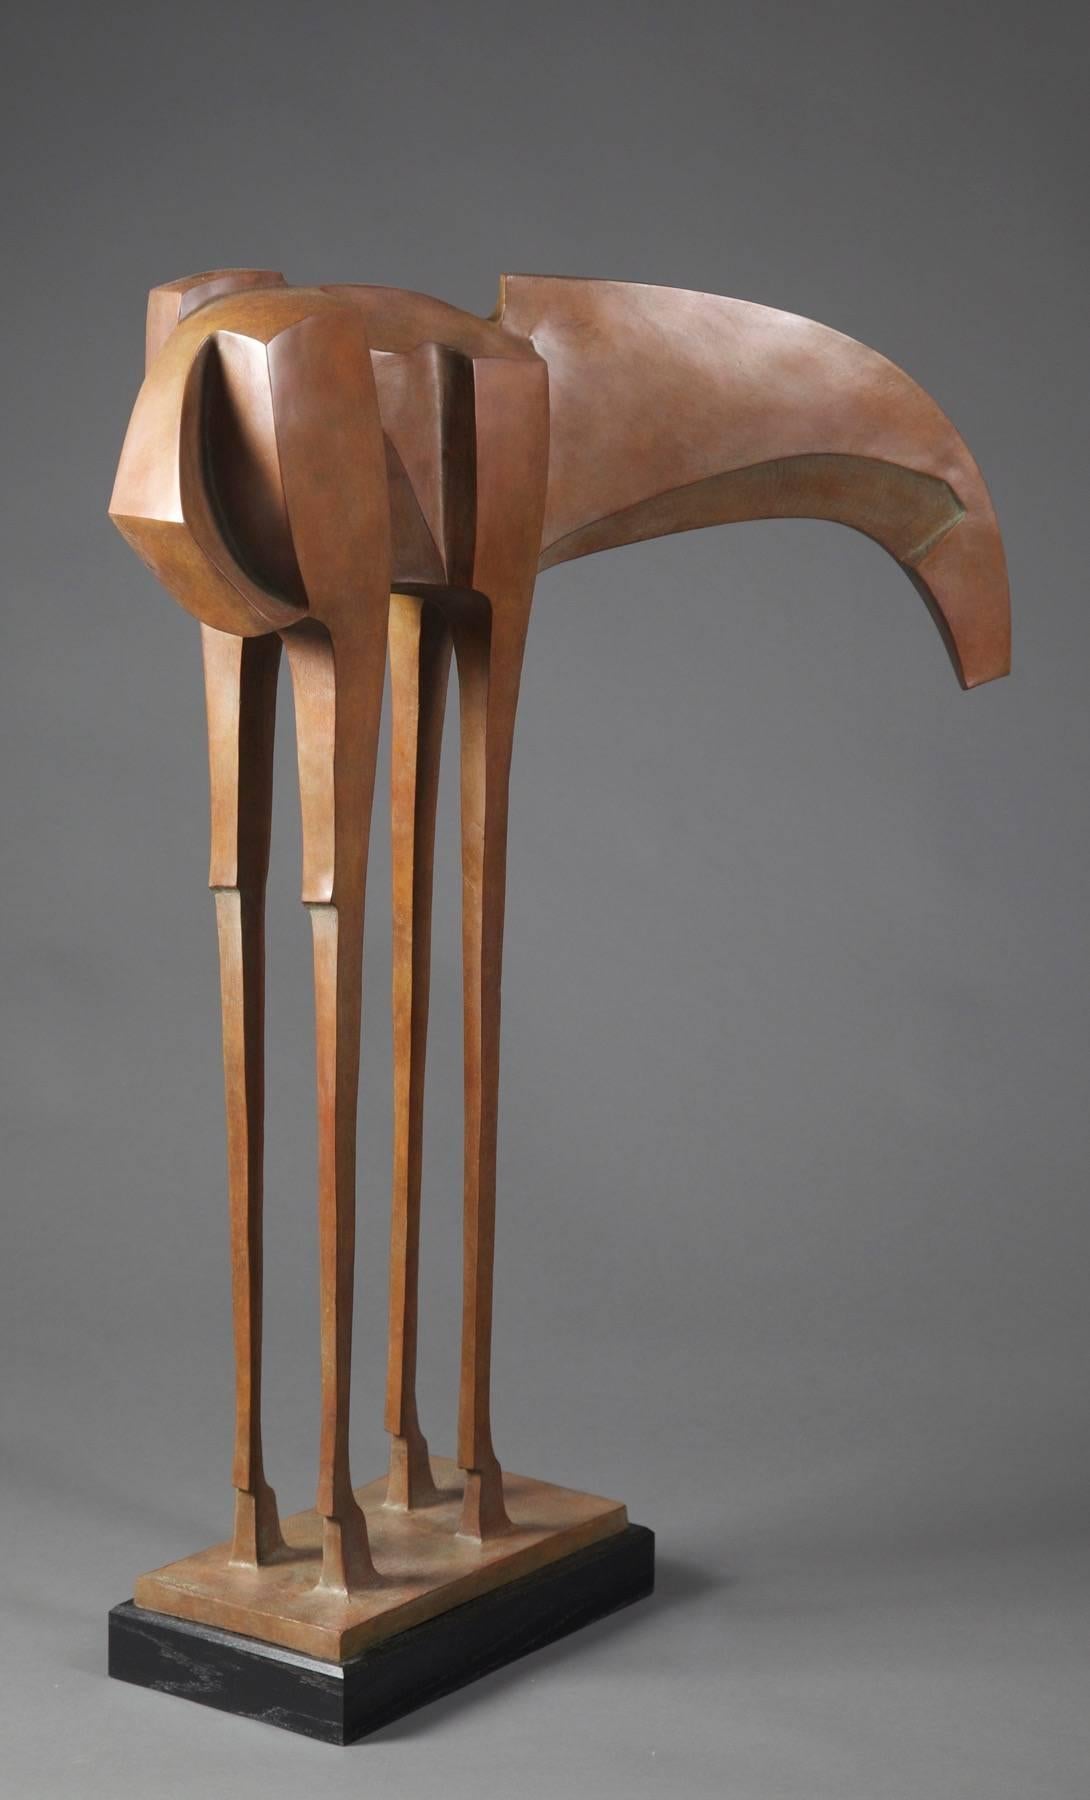 The historic tradition of cast bronze provides a contemporary avenue for the creation of Wayne Salge’s abstracted human and animal figures. Thoroughly modern and distinctly impressionistic, his signature style is recognized by long lines, sharp